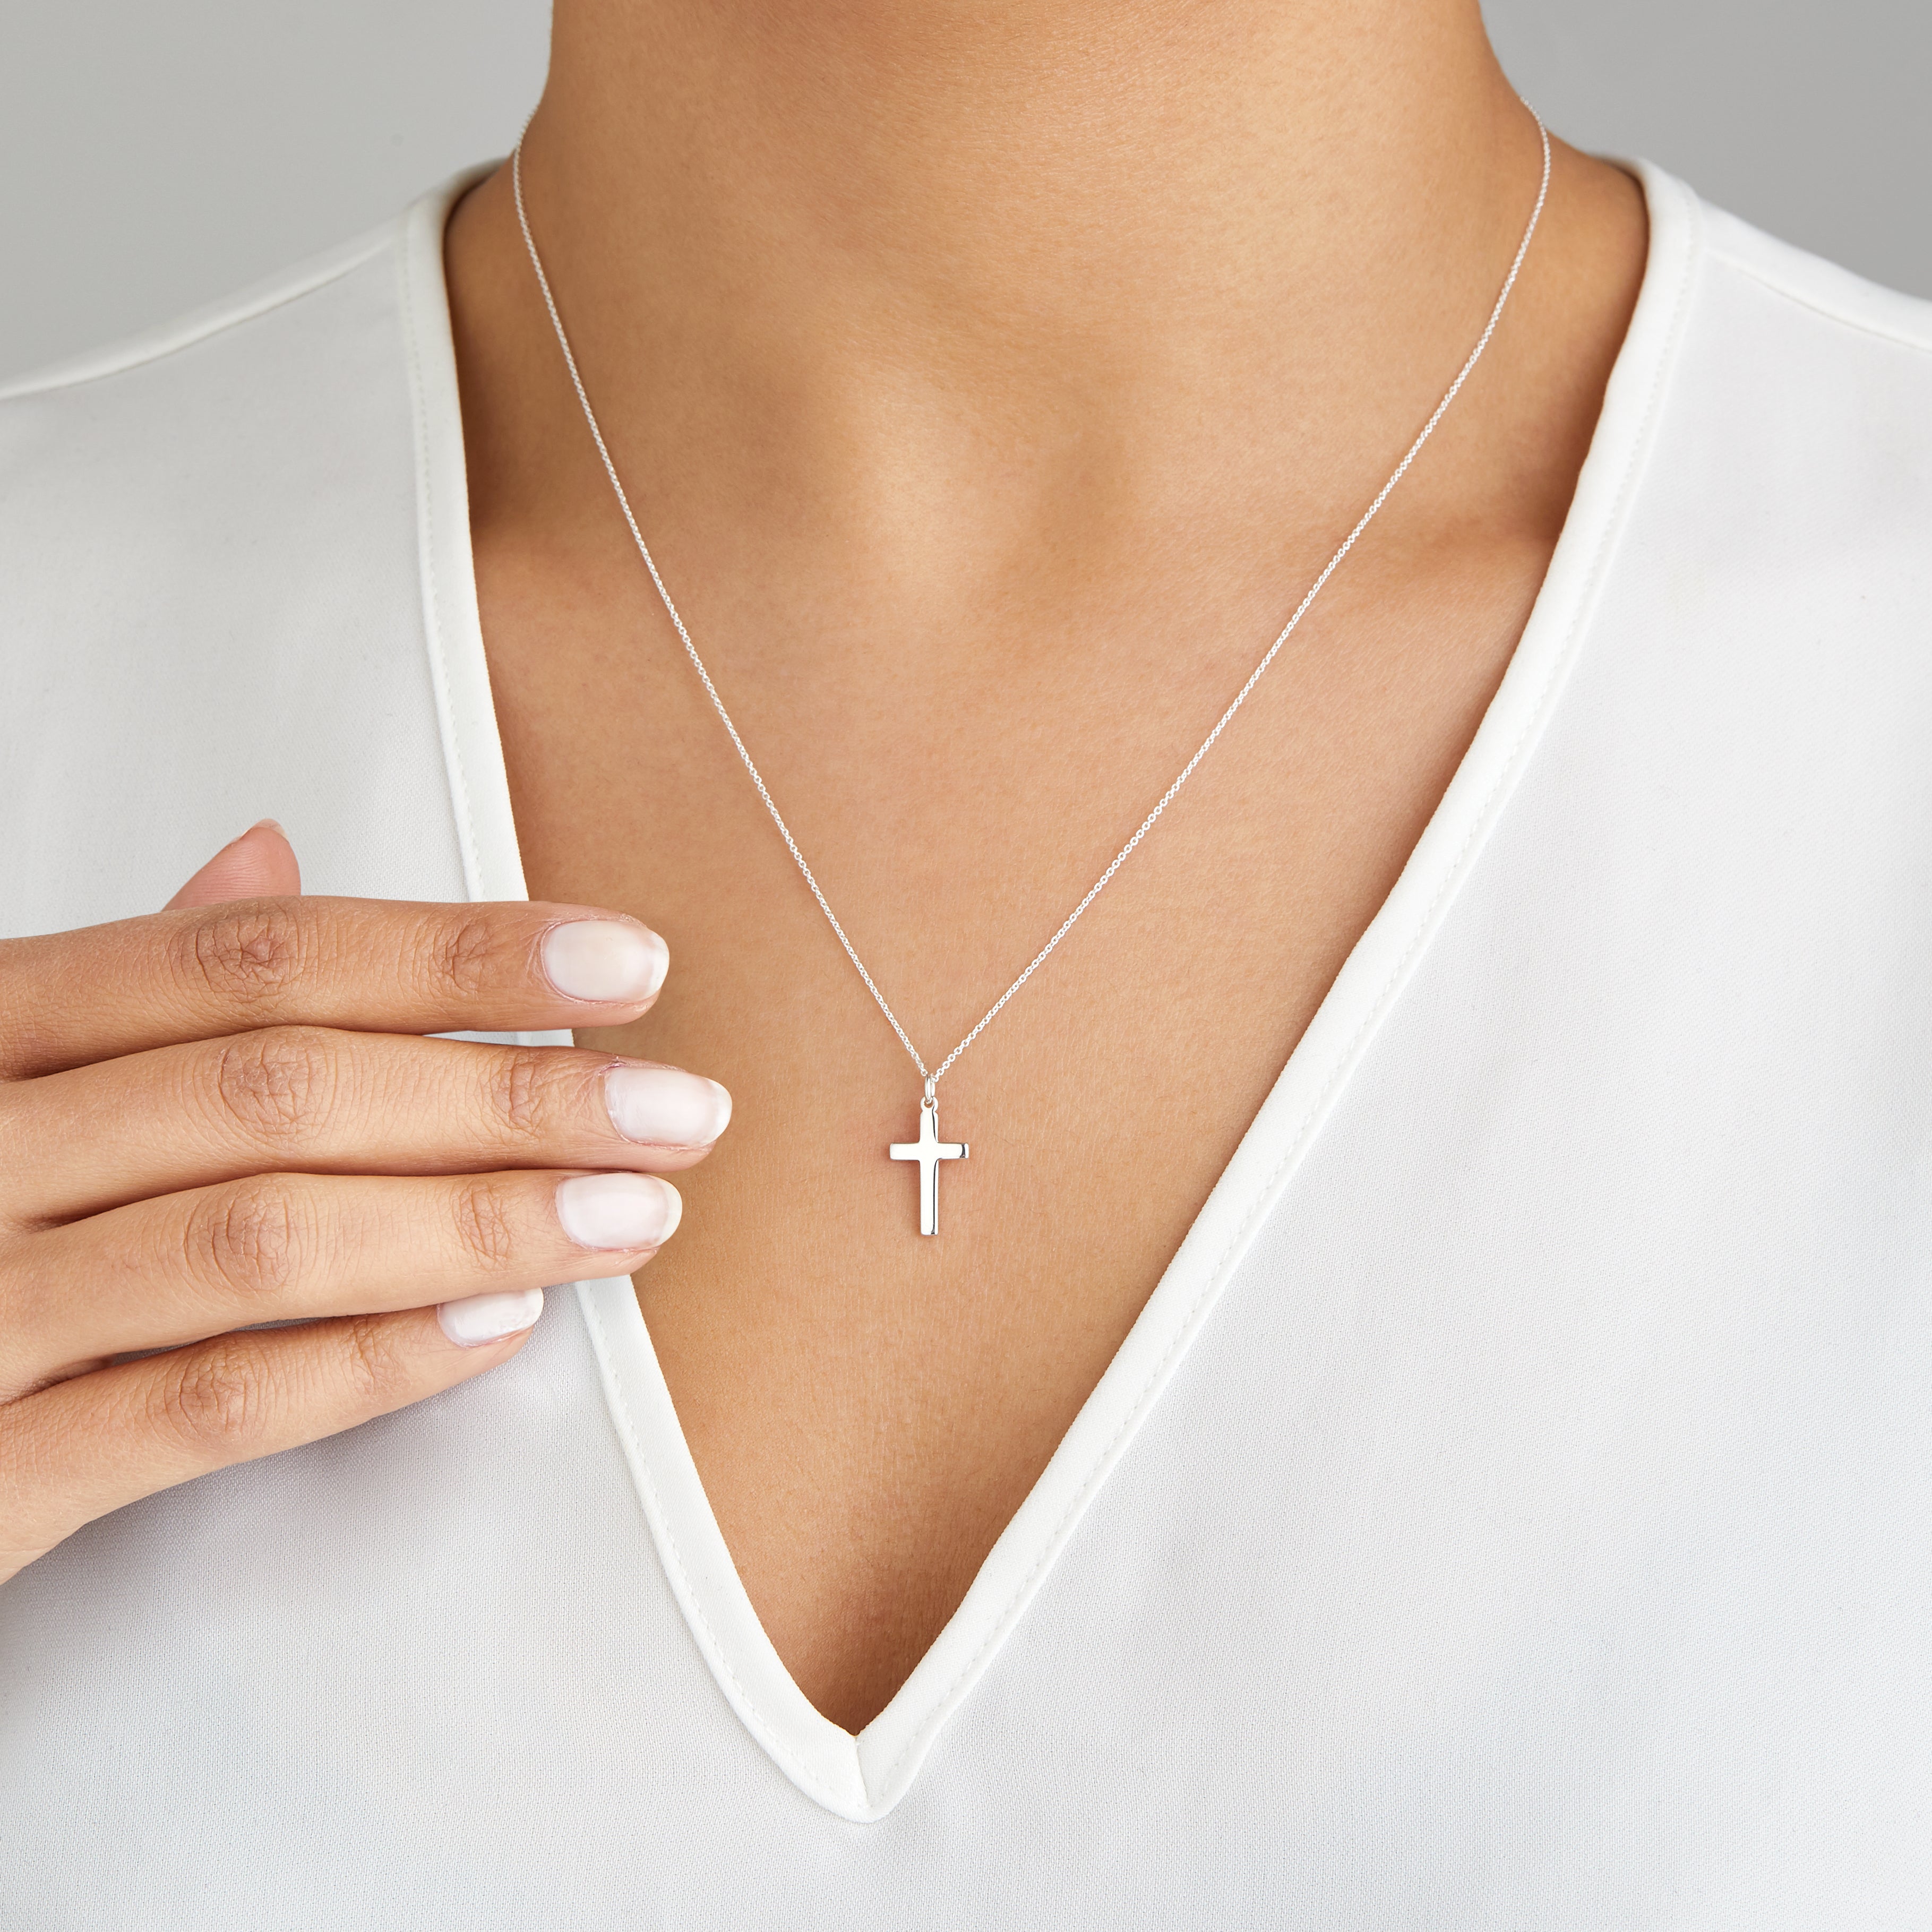 Silver cross necklace around a neck with a white V-neck top